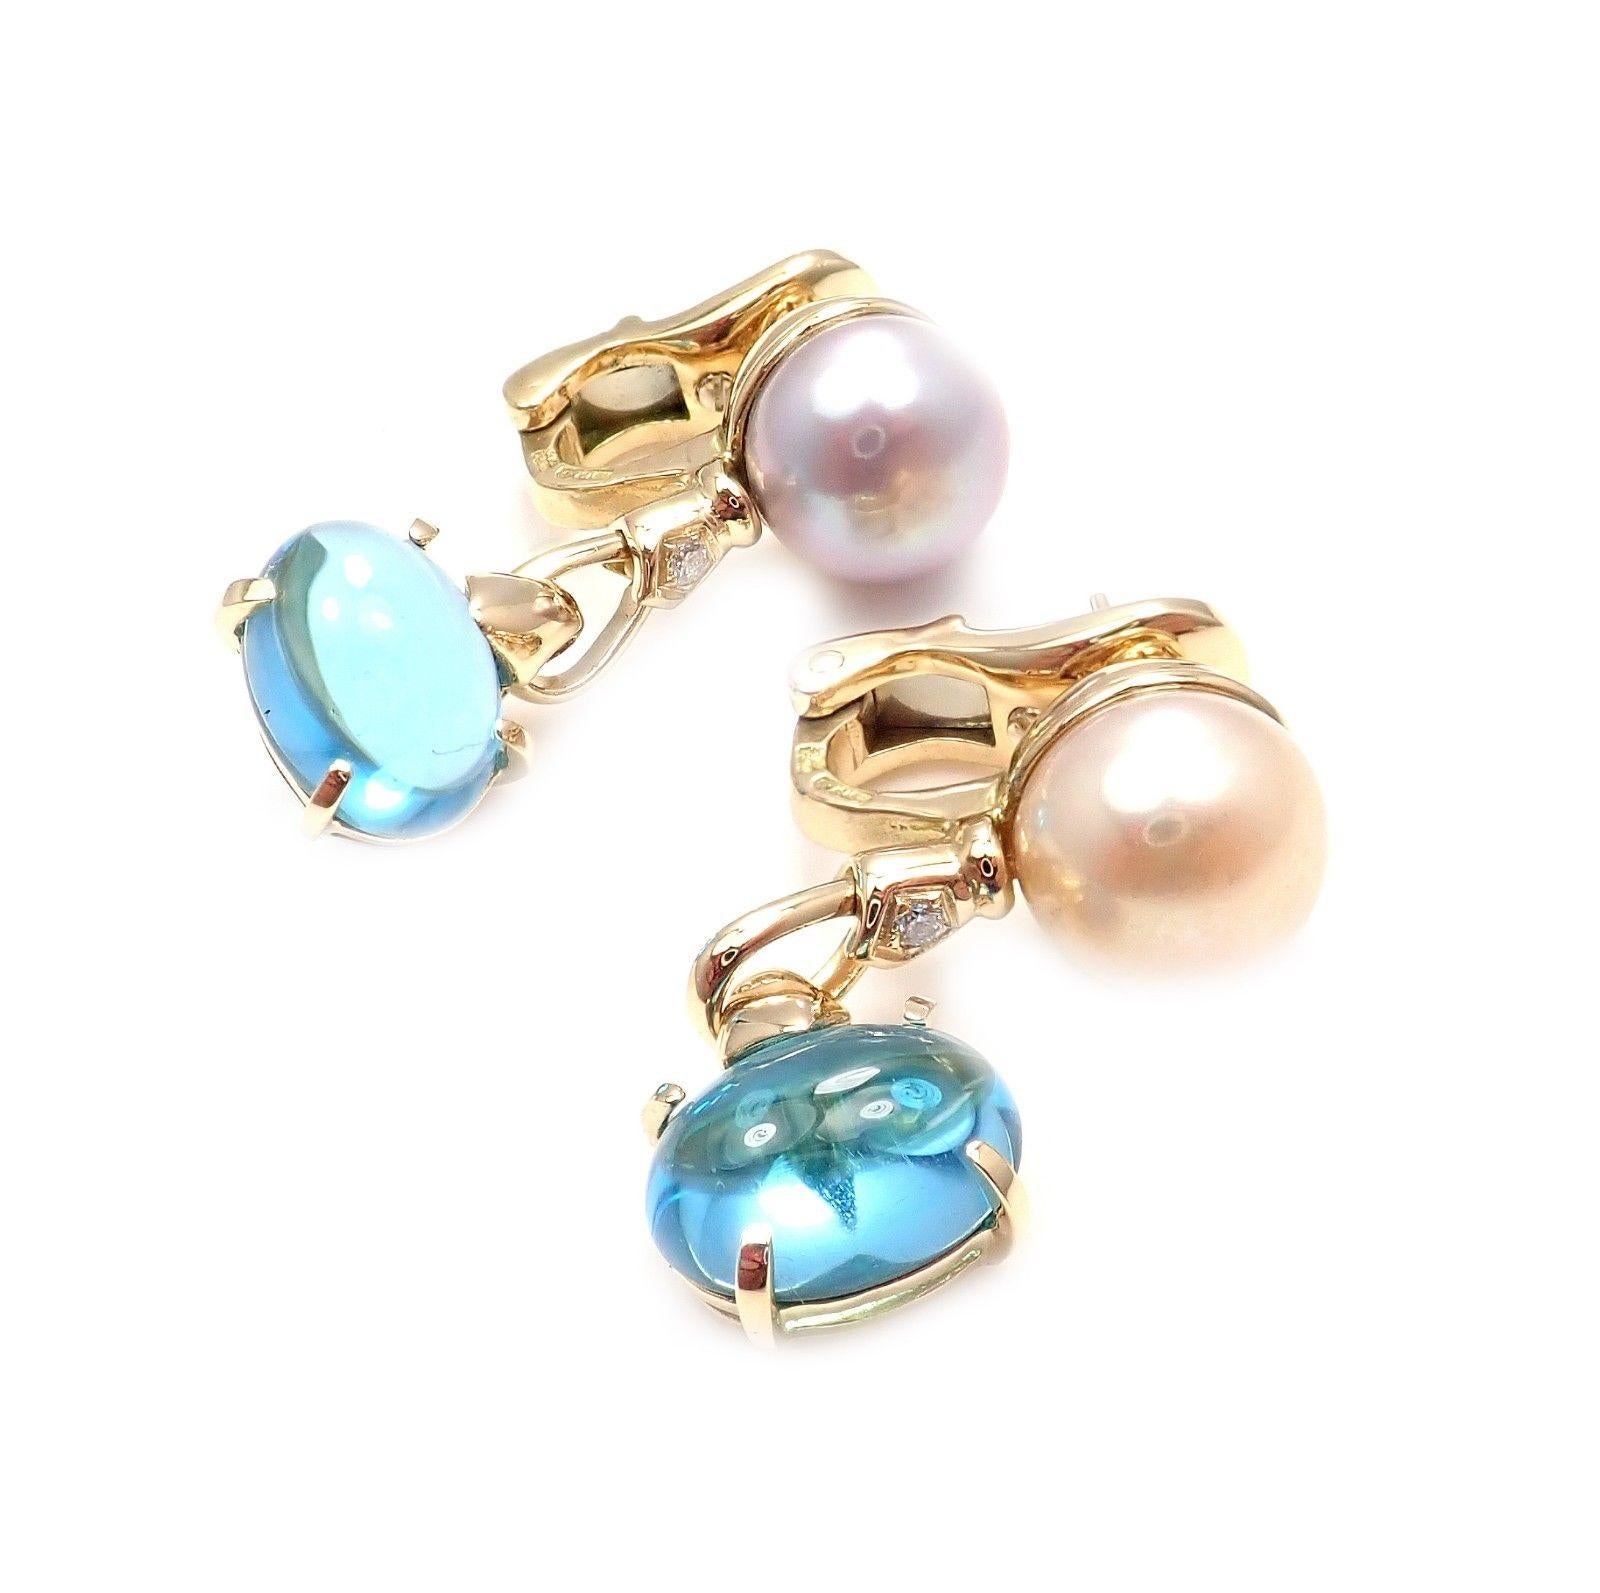 18k yellow gold diamond akoya pearl Allegra earrings by Bulgari.
With 2x Diamonds 0.05ctw
1x Akoya Pearl 9.5mm
1x South Sea Pearl 9.5mm
2x Blue Topaz 8mm x 11mm
These earrings are made for pierced ears.
Detail:
Measurements: Full: 11mm x 29mm
Bottom